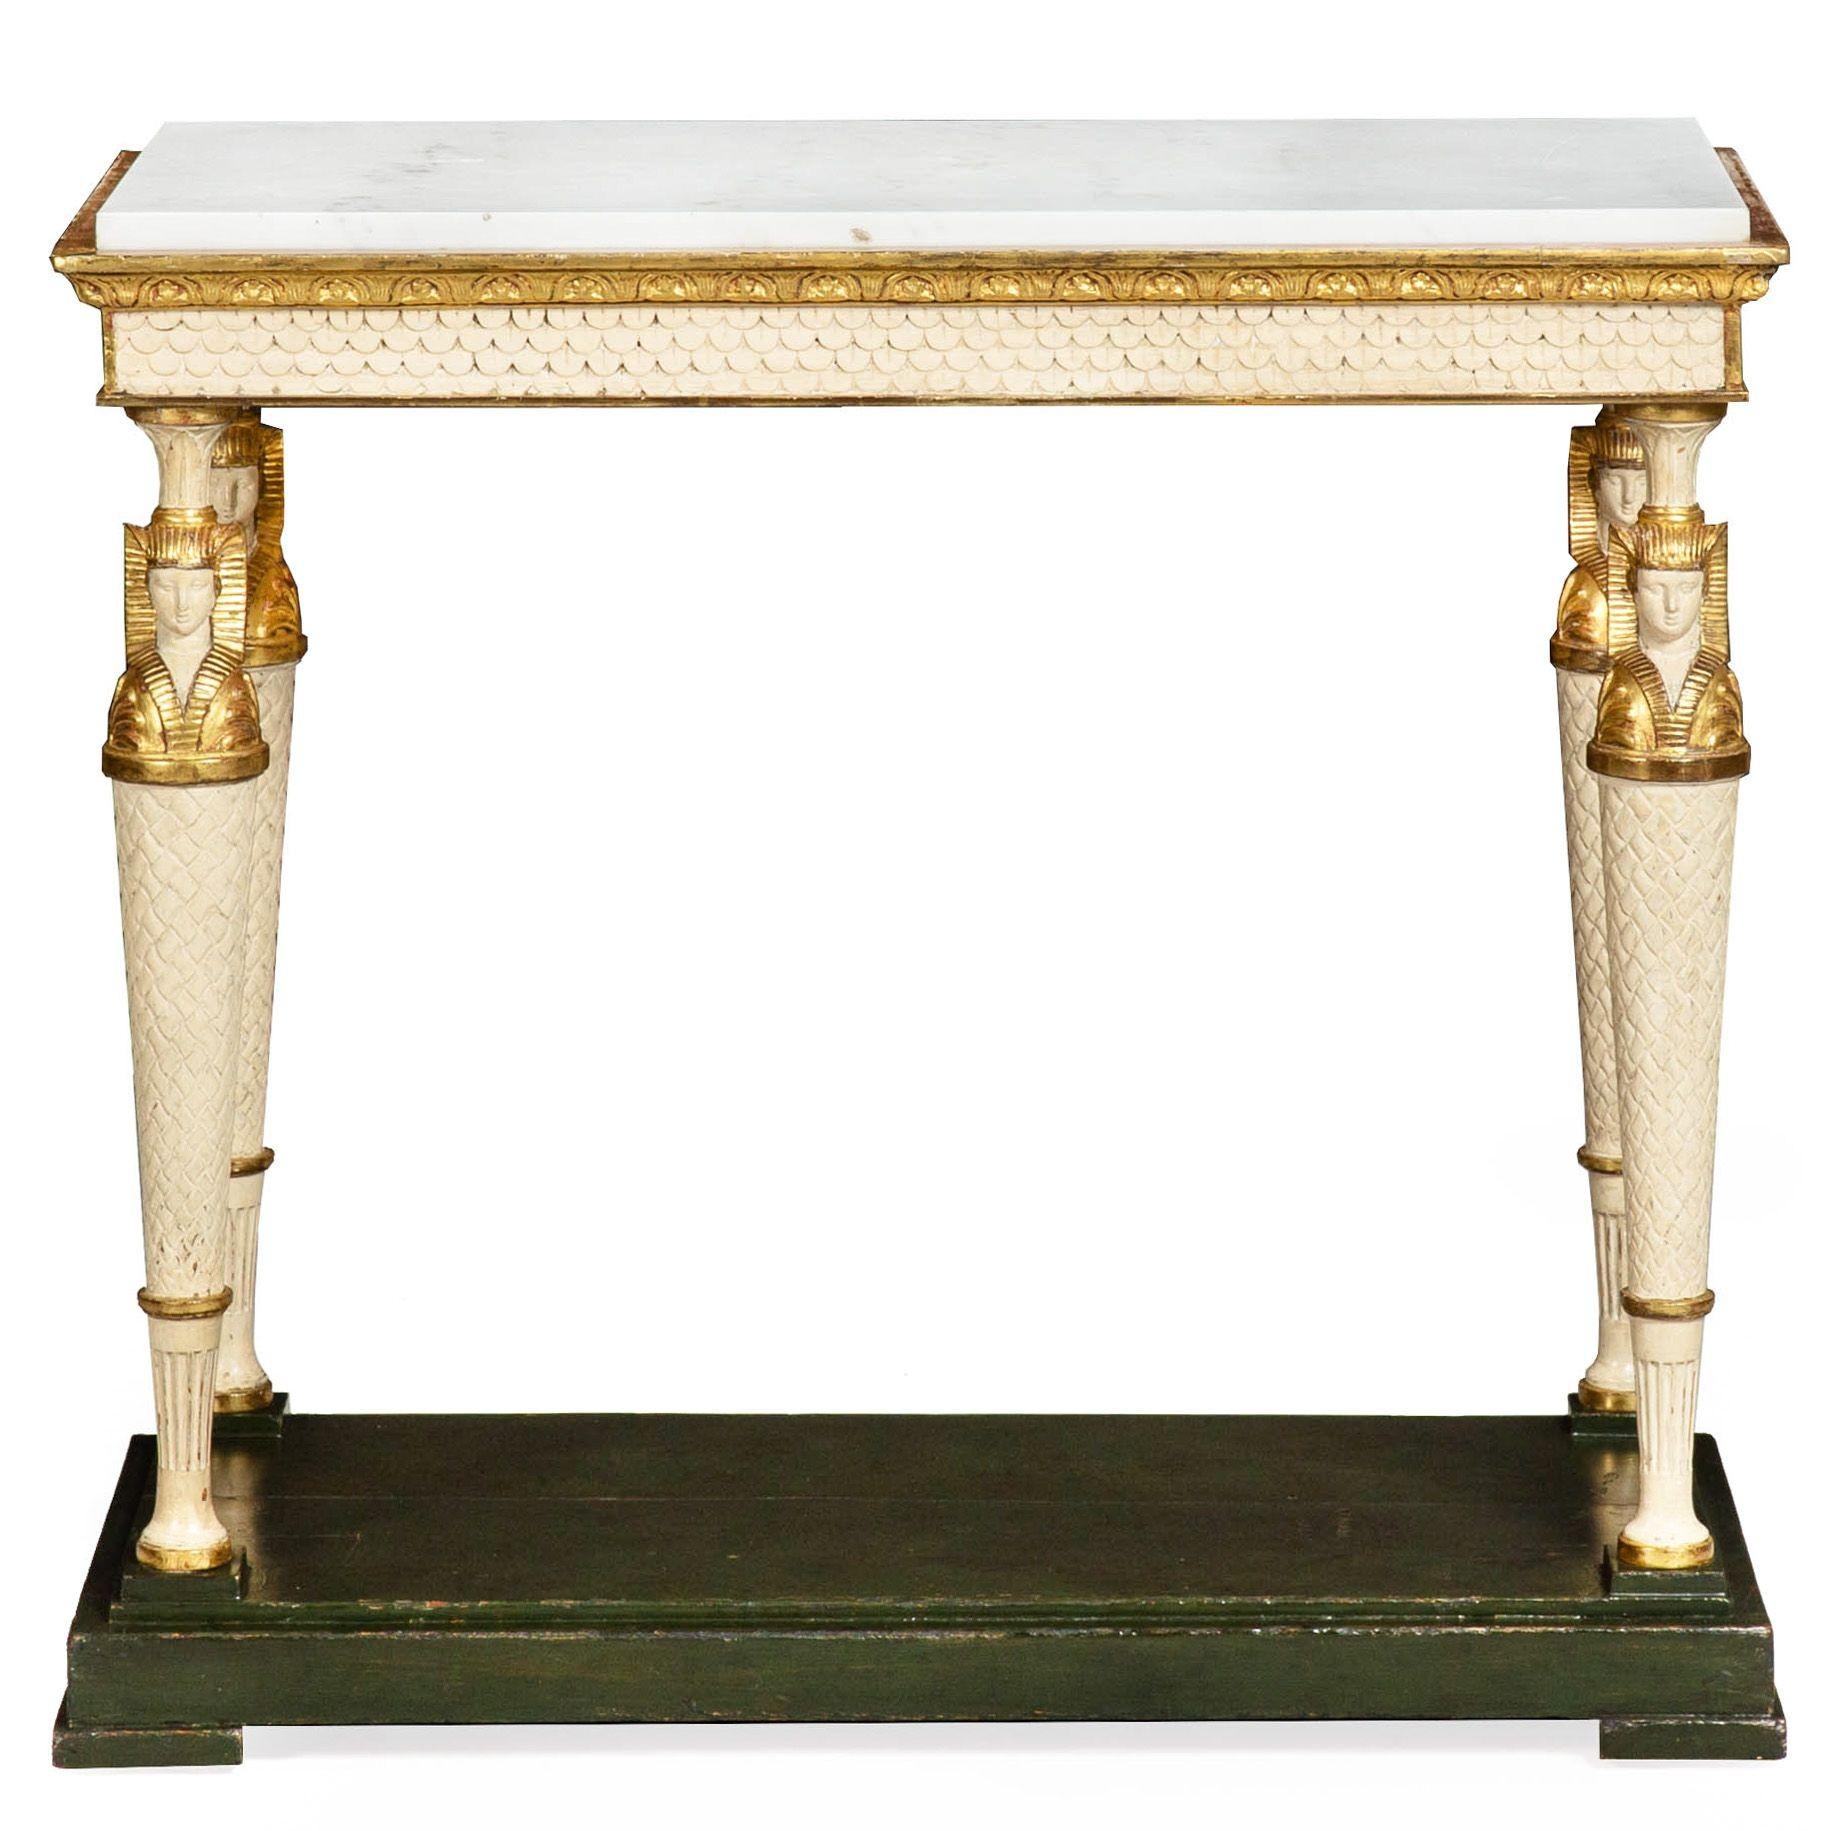 A VERY FINE EMPIRE POLYCHROMED MARBLE-TOP PIER CONSOLE TABLE IN THE EGYPTIAN TASTE
Sweden, circa 1810-1820  with early green and pearl painted elements against parcel-gilding
Item # 312DJG08W

A remarkable and visually compelling pier table of the